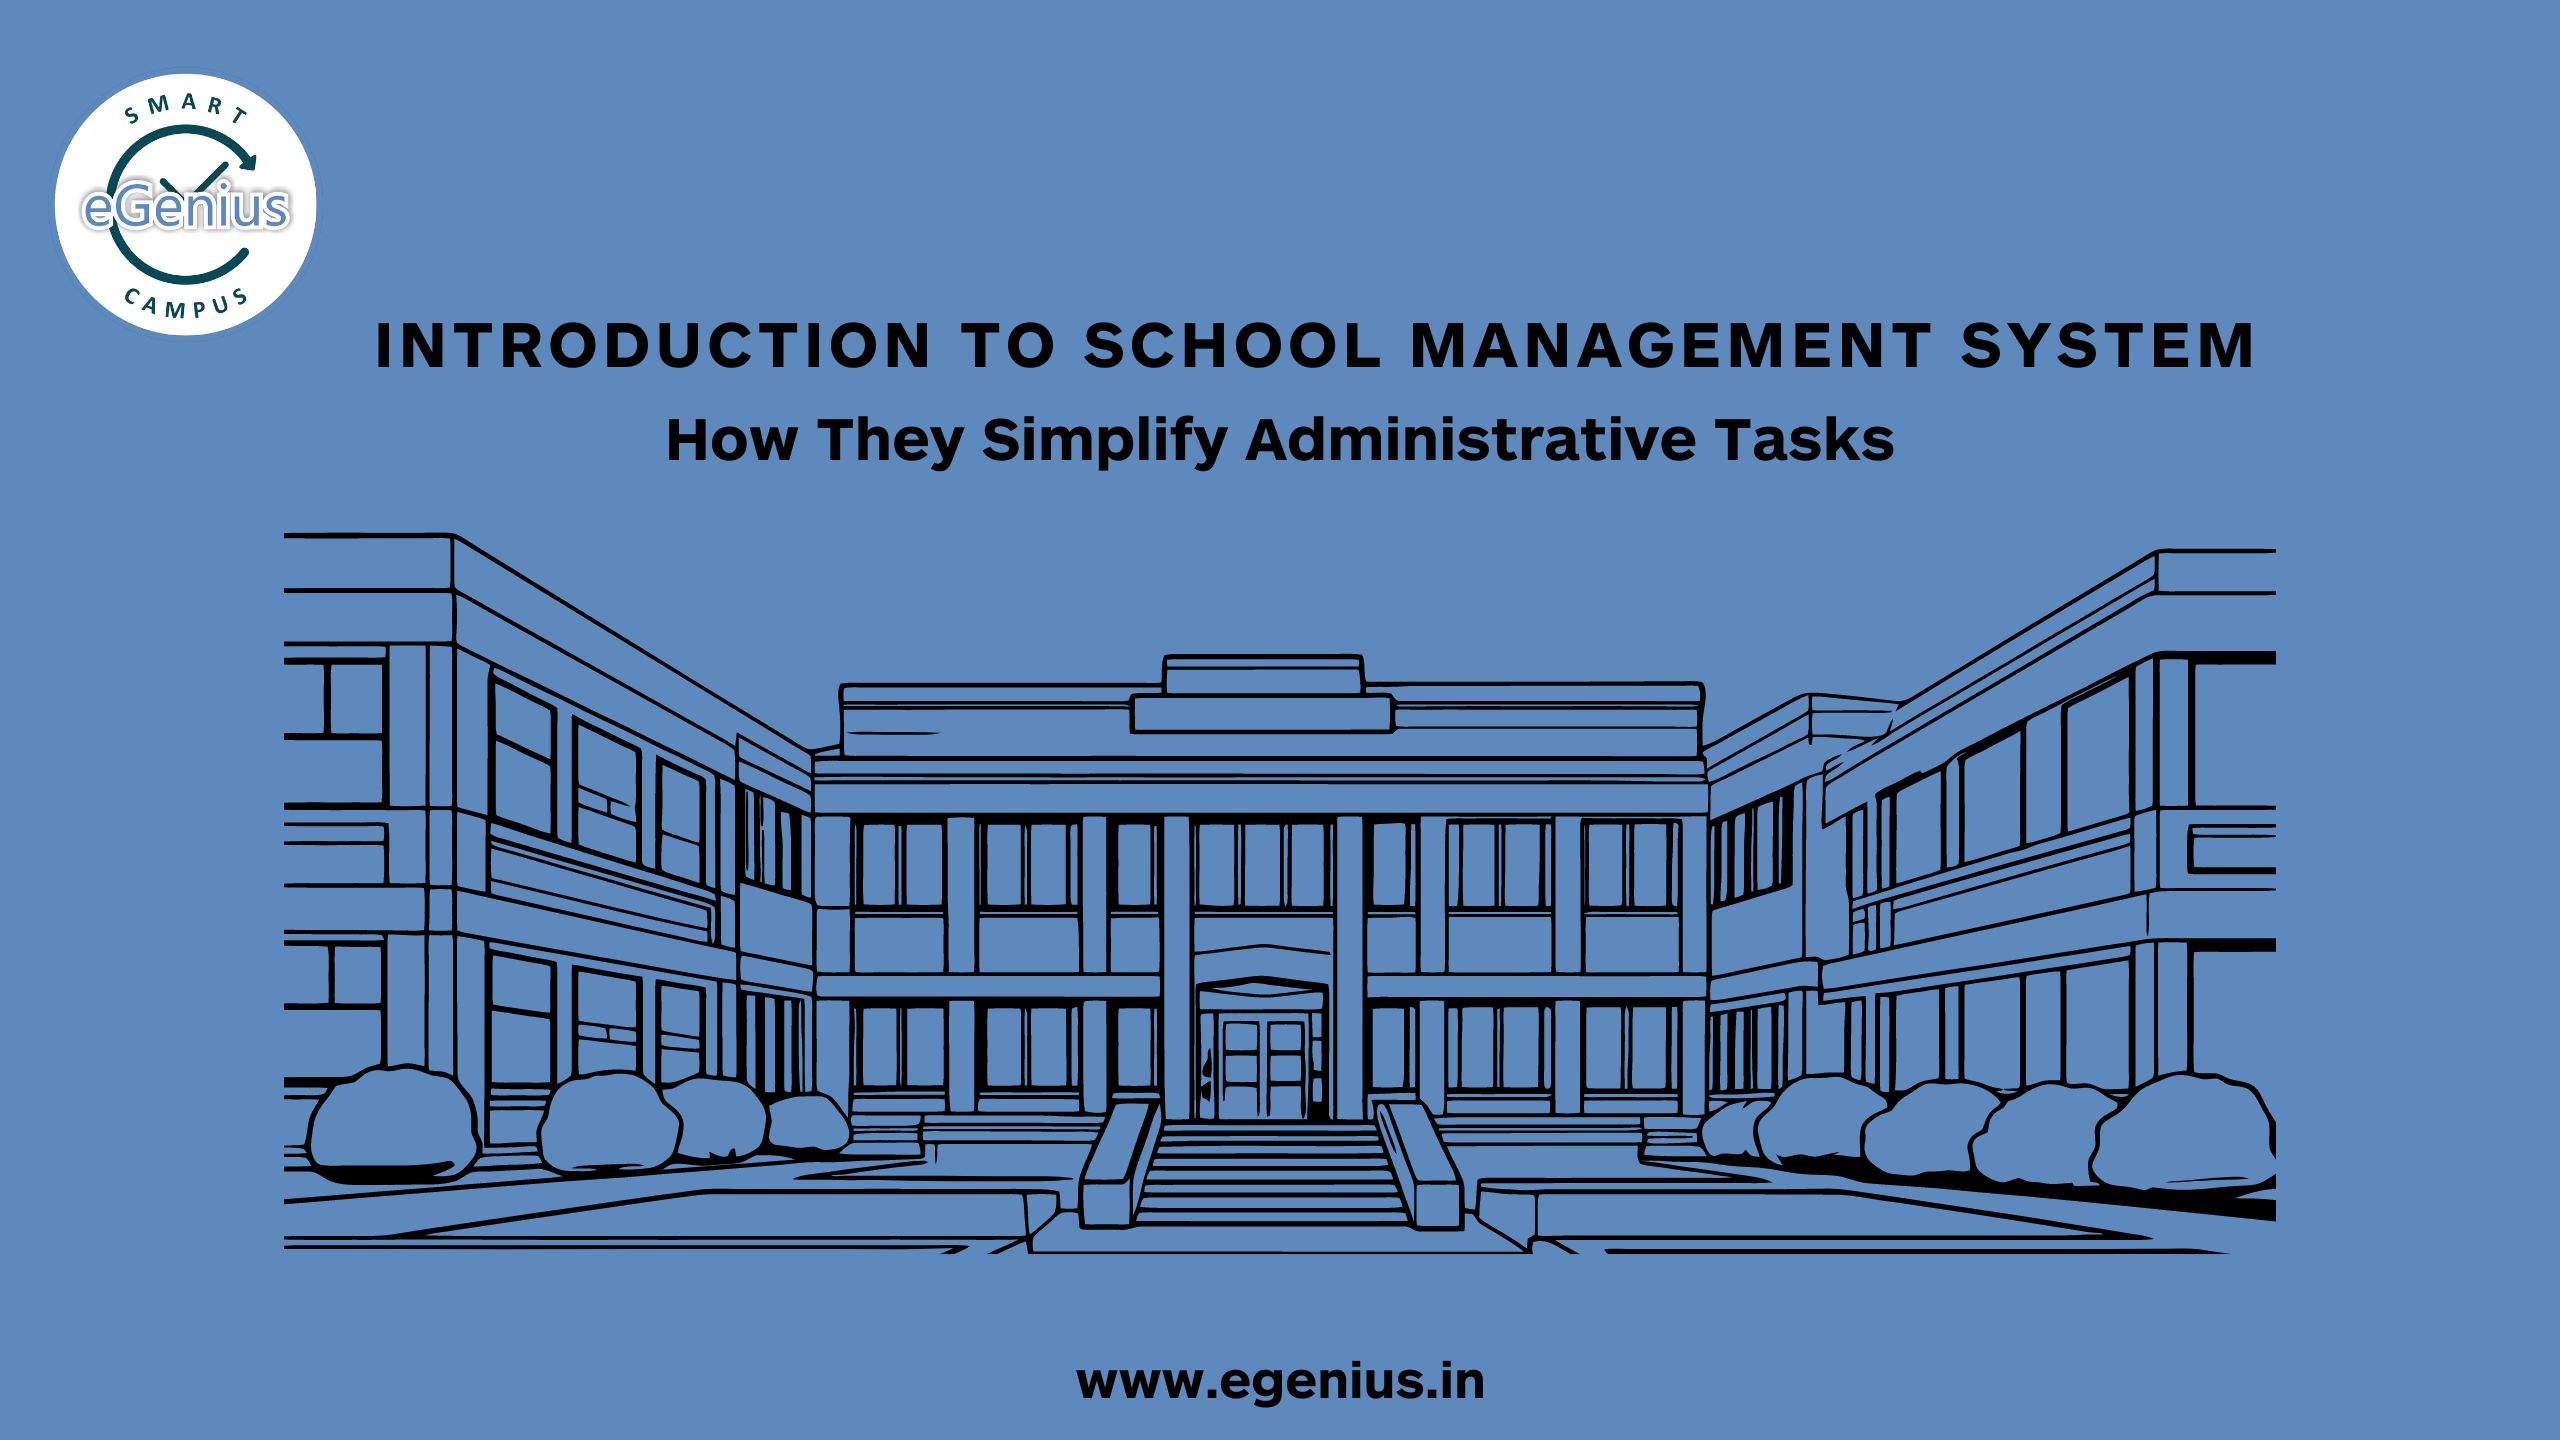 Introduction to the School Management System